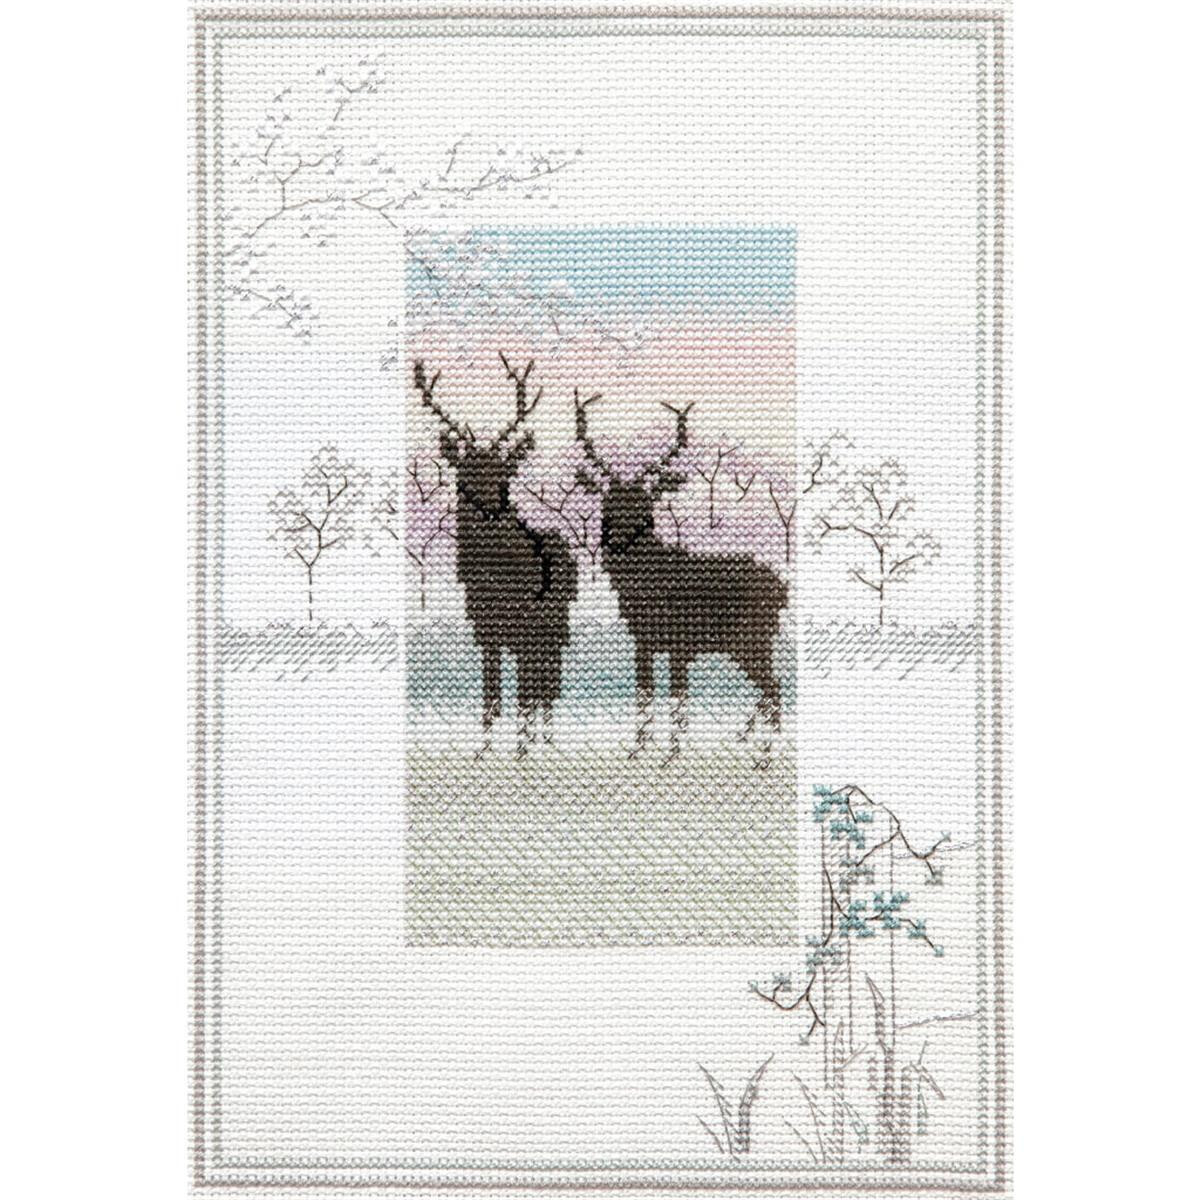 An embroidered embroidery pack from Bothy Threads...